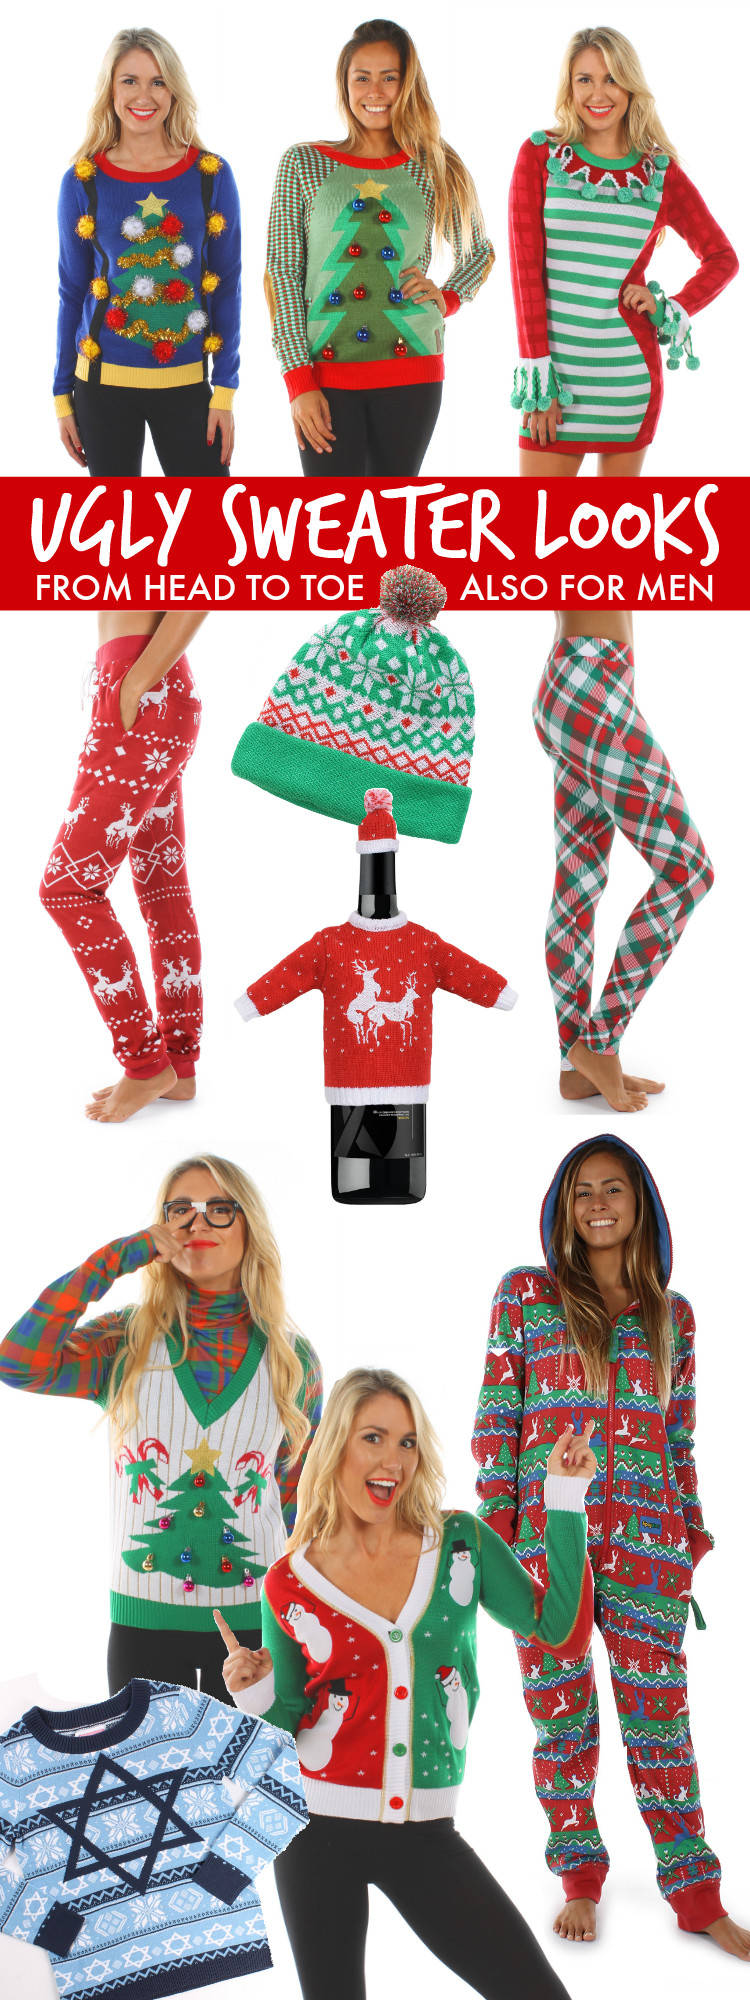 Ugly Christmas Sweater Party Decoration Ideas
 Ugly Christmas Sweater Party Looks Oh My Creative